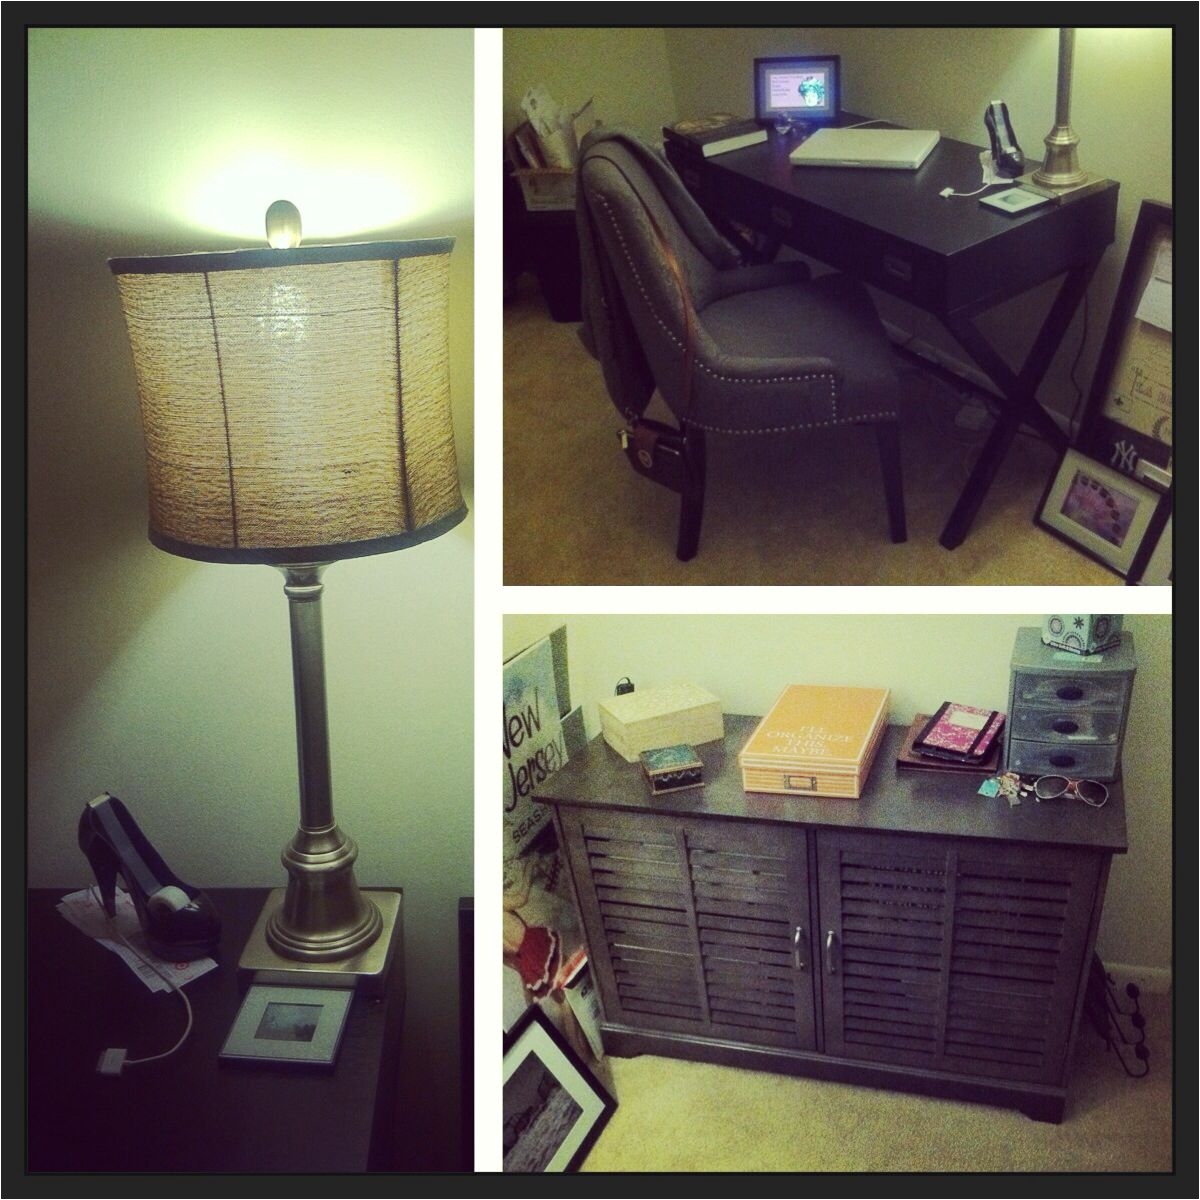 Table Lamps at Homegoods My Office so Far Target Desk Media Hutch Homegoods Chair